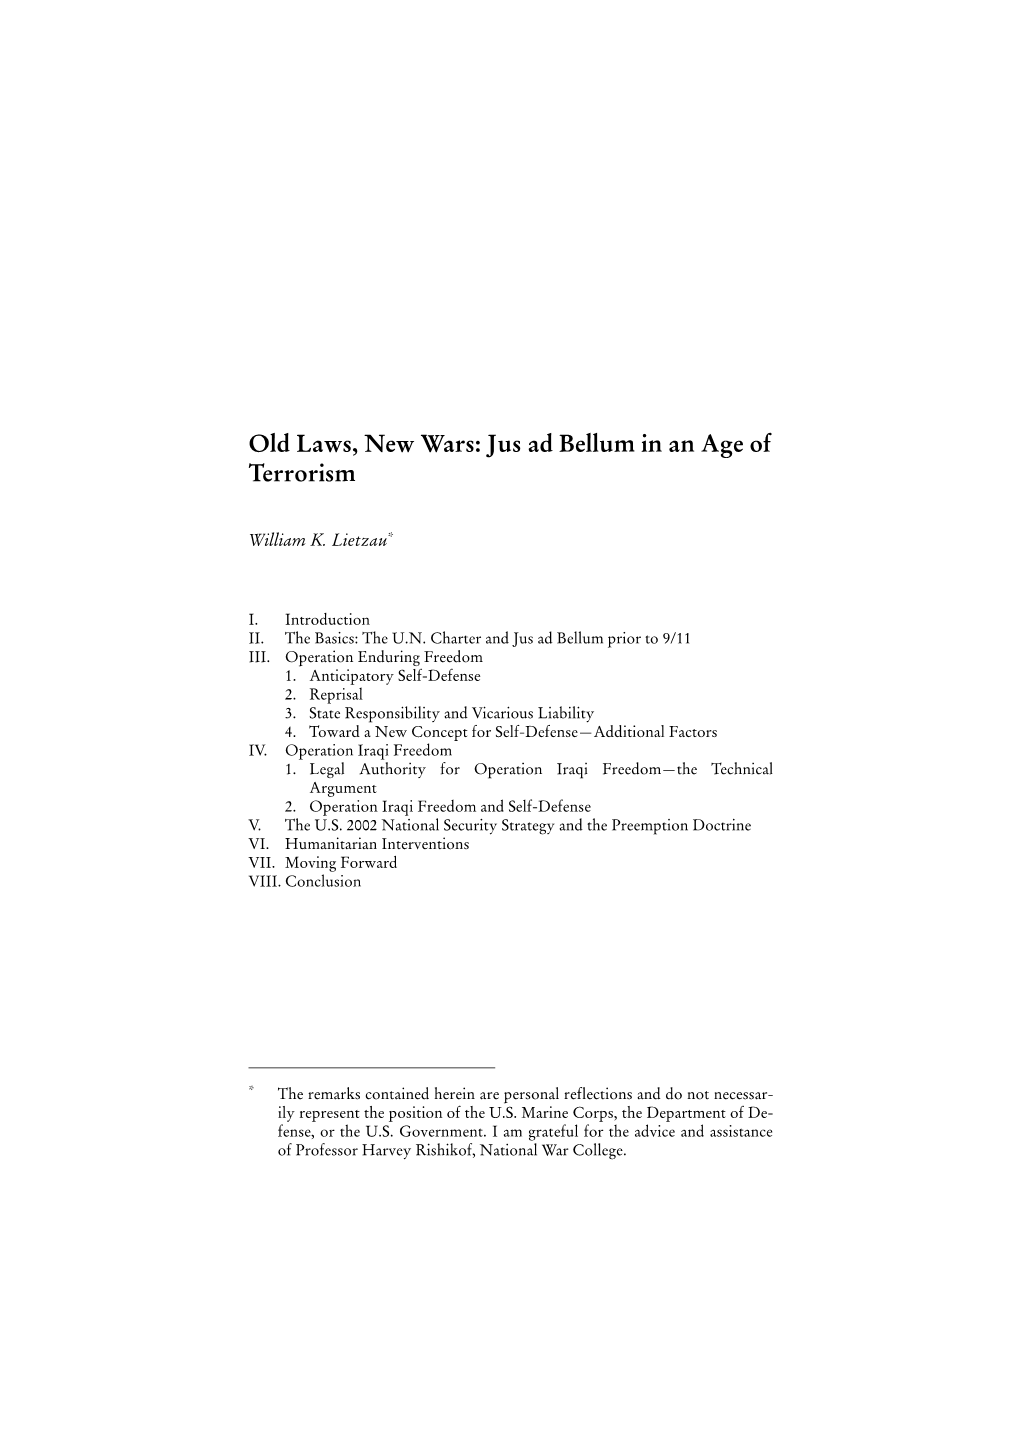 Old Laws, New Wars: Jus Ad Bellum in an Age of Terrorism (PDF, 410.9